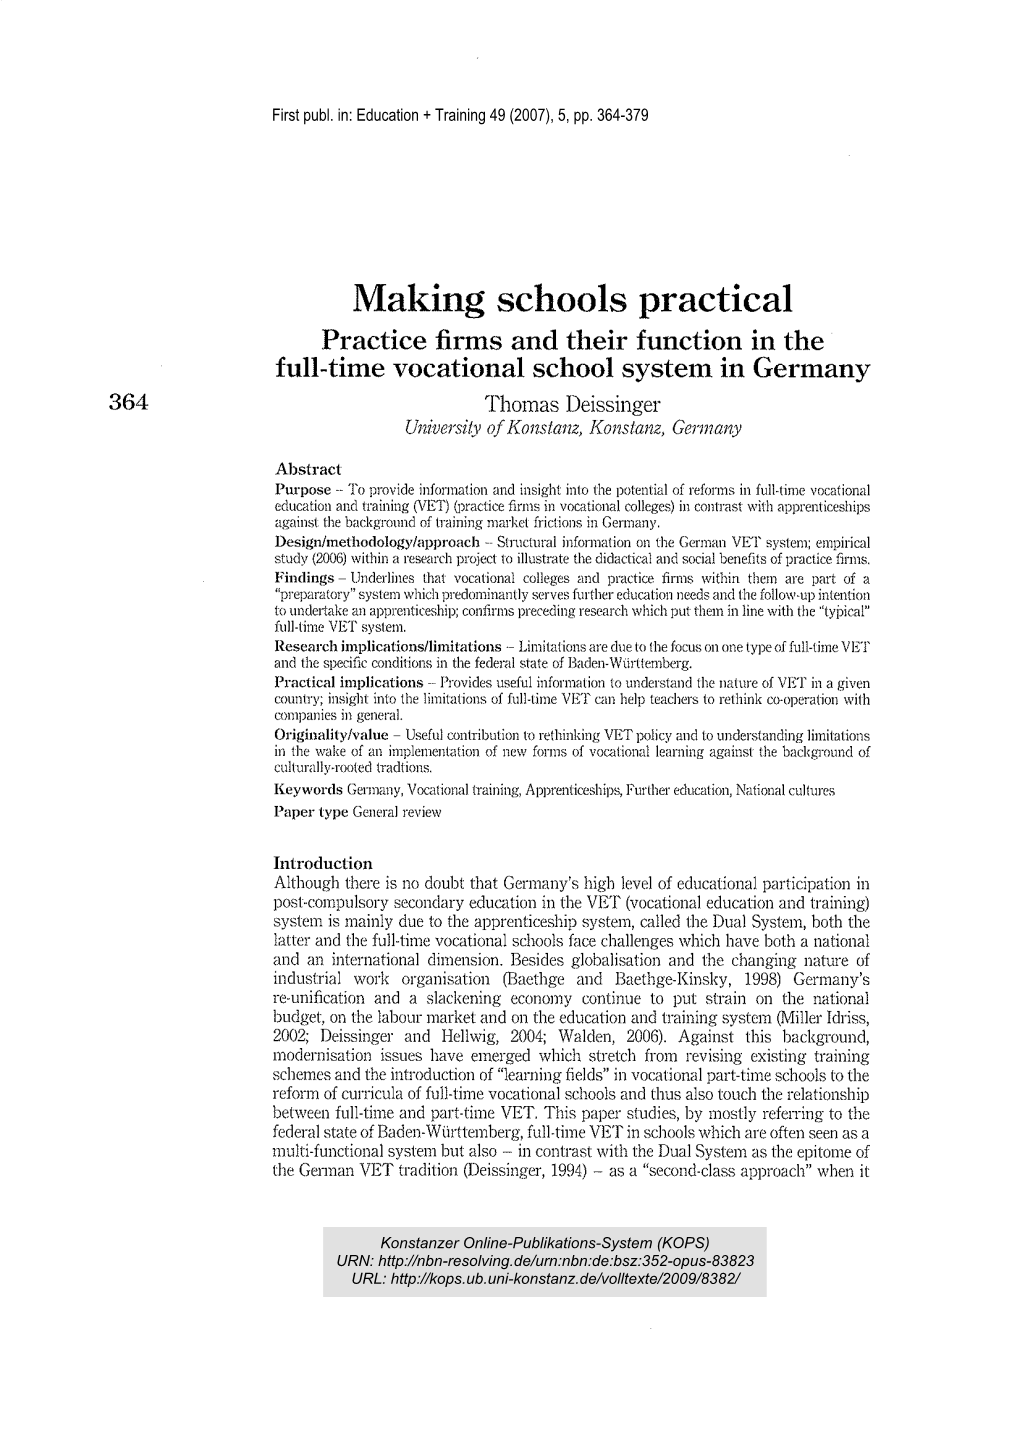 Practice Firms and Their Function in the Full-Time Vocational School System in Germany 364 Thomas Deissinger University of Konstanz, Kol1stal1z, Germany